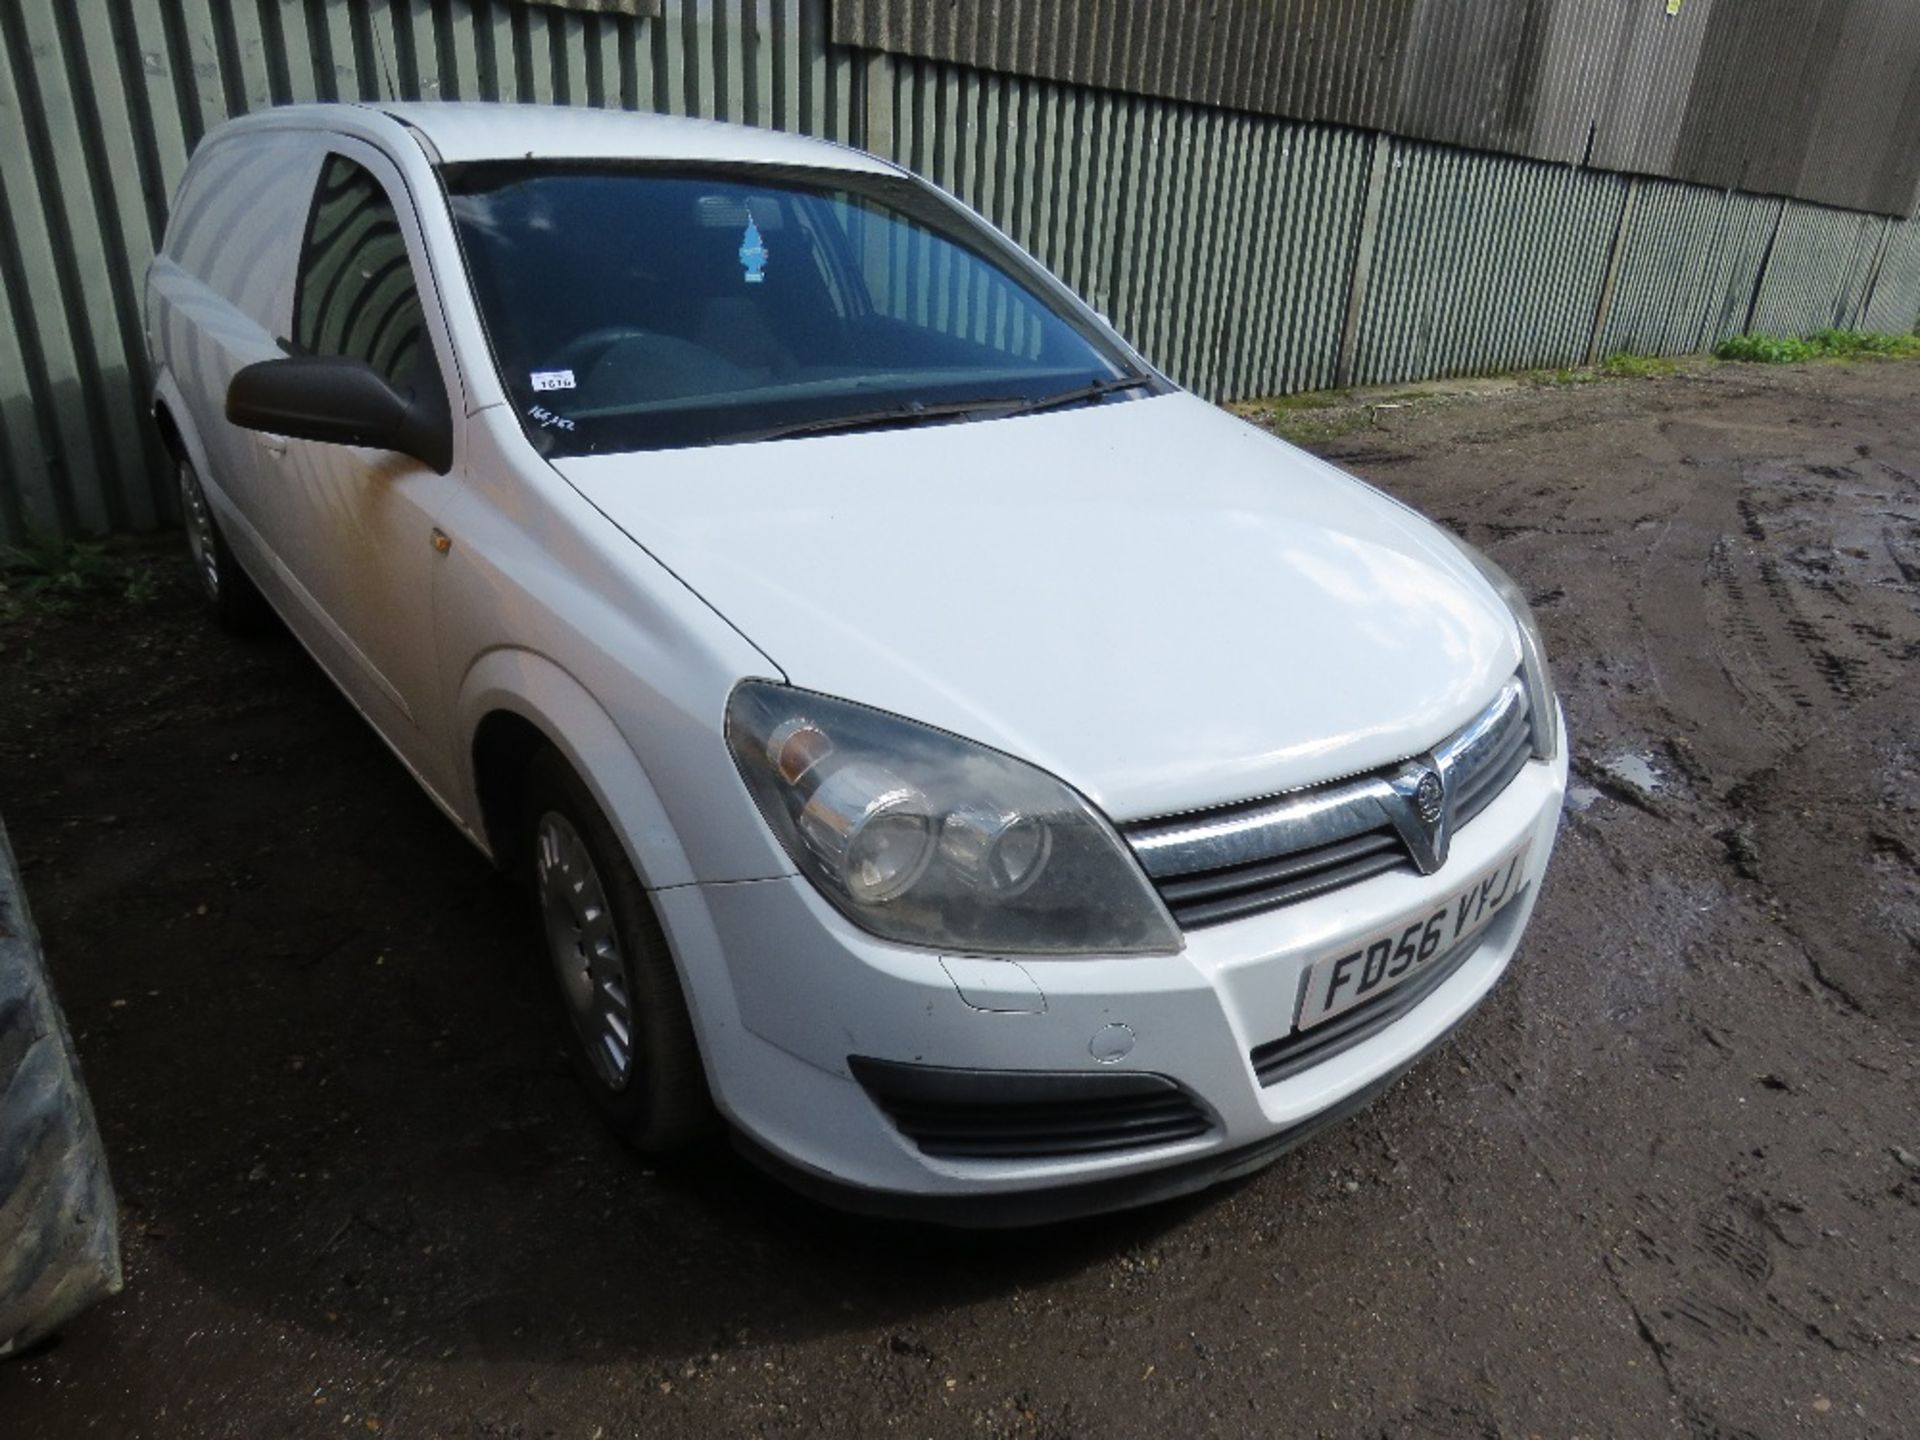 VAUXHALL ASTRA PANEL VAN REG:FD56 VYJ. 166,382 REC MILES.WITH V5 AND MOT UNTIL 07/11/24. WHEN TESTED